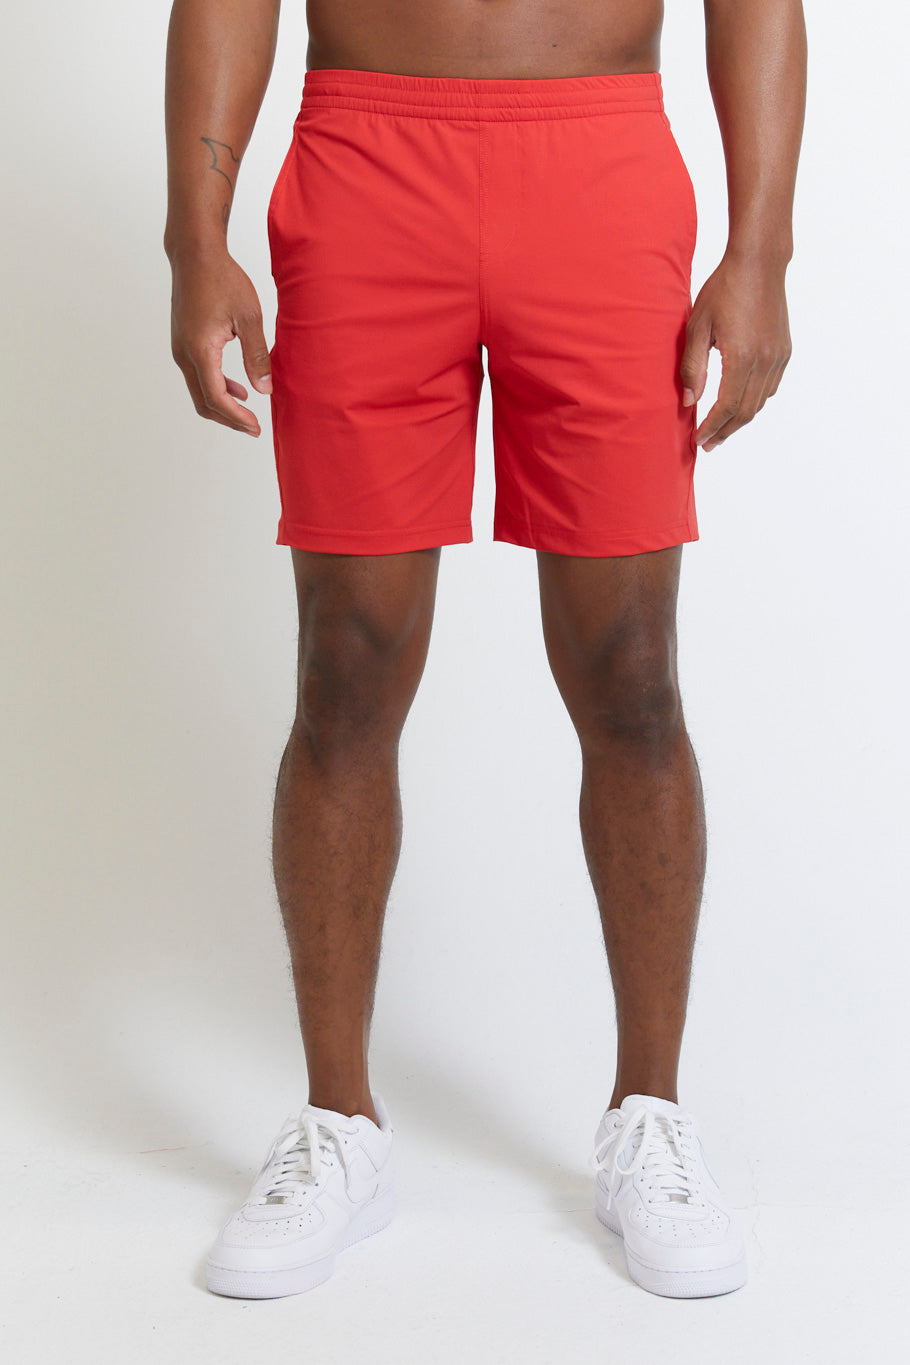 Image of the byron tennis short in rio